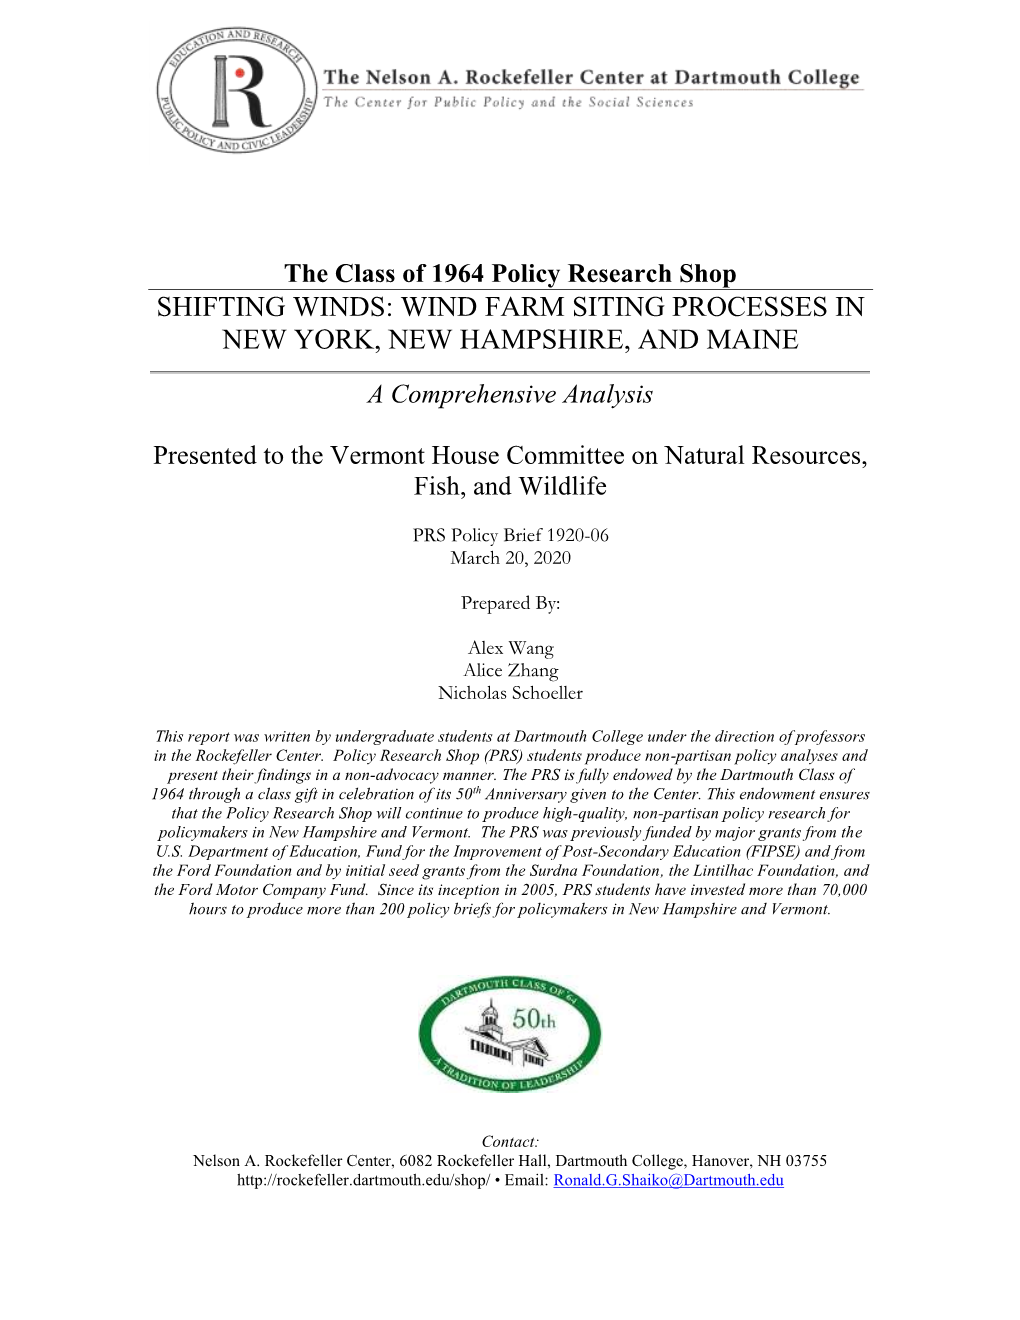 Wind Farm Siting Processes in New York, New Hampshire, and Maine